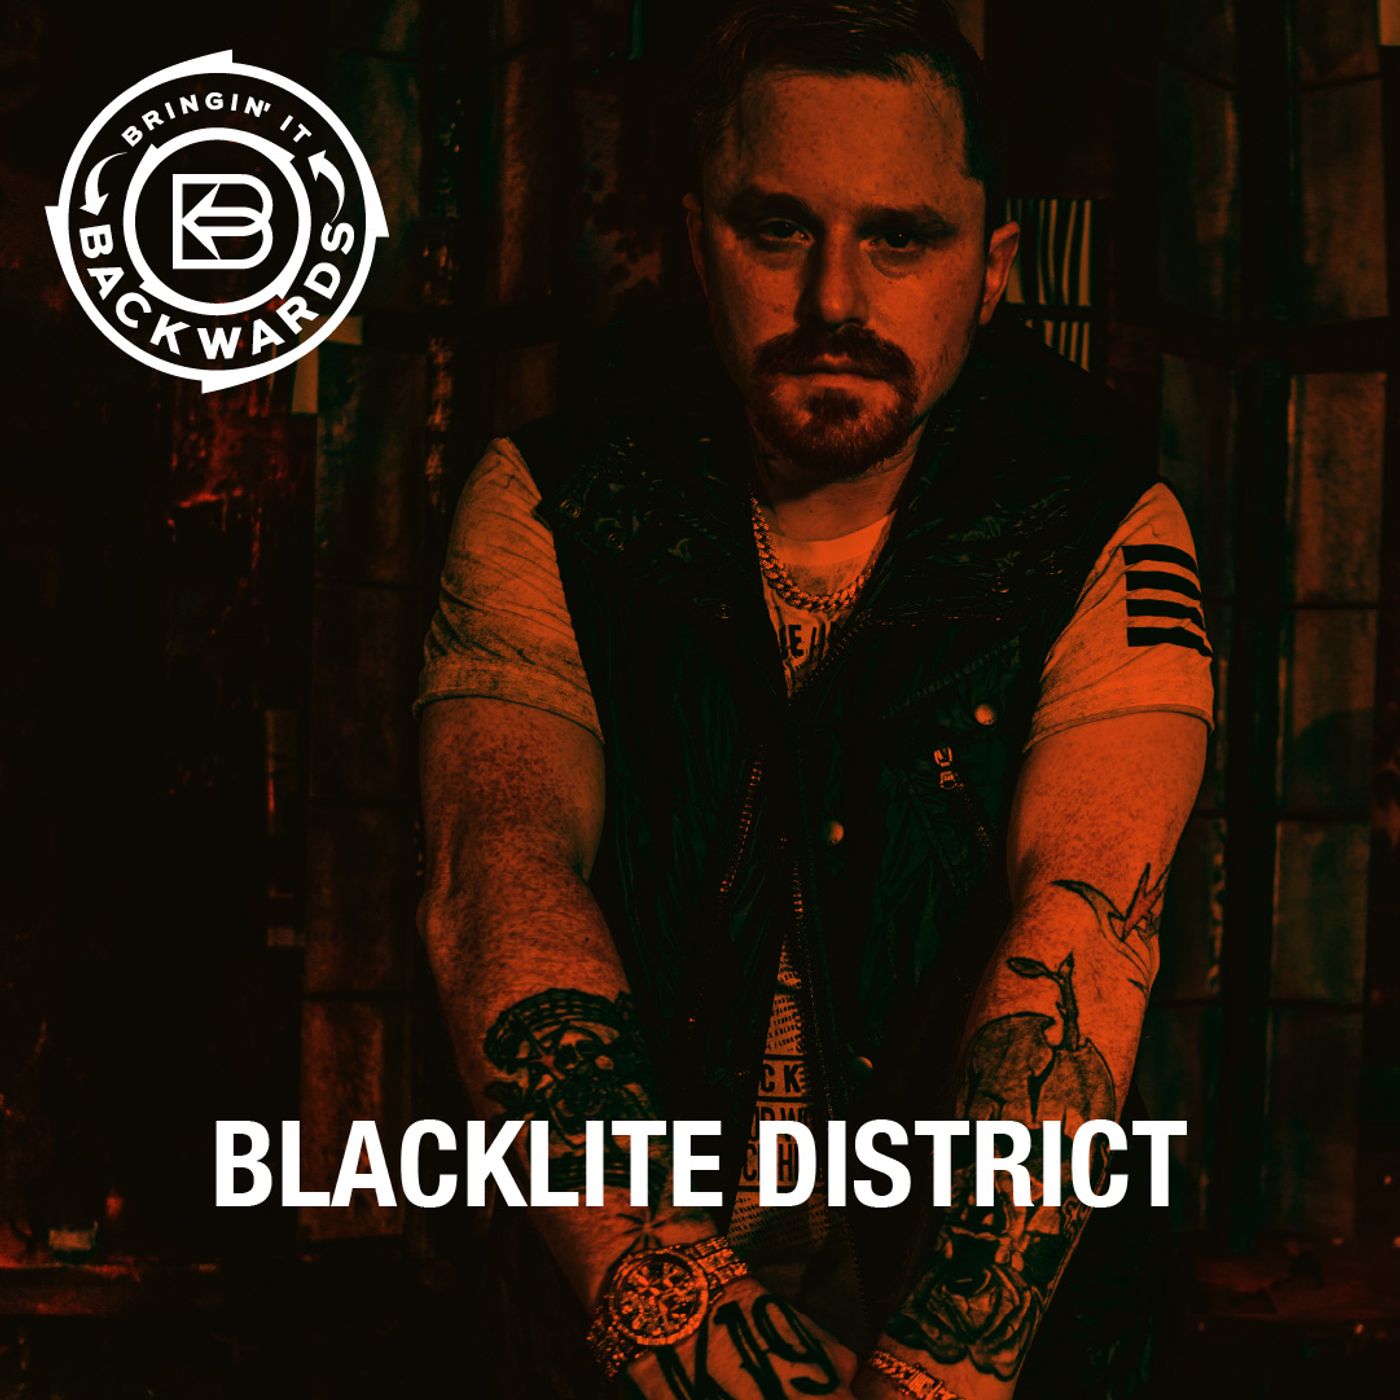 Interview with Blacklite District Image